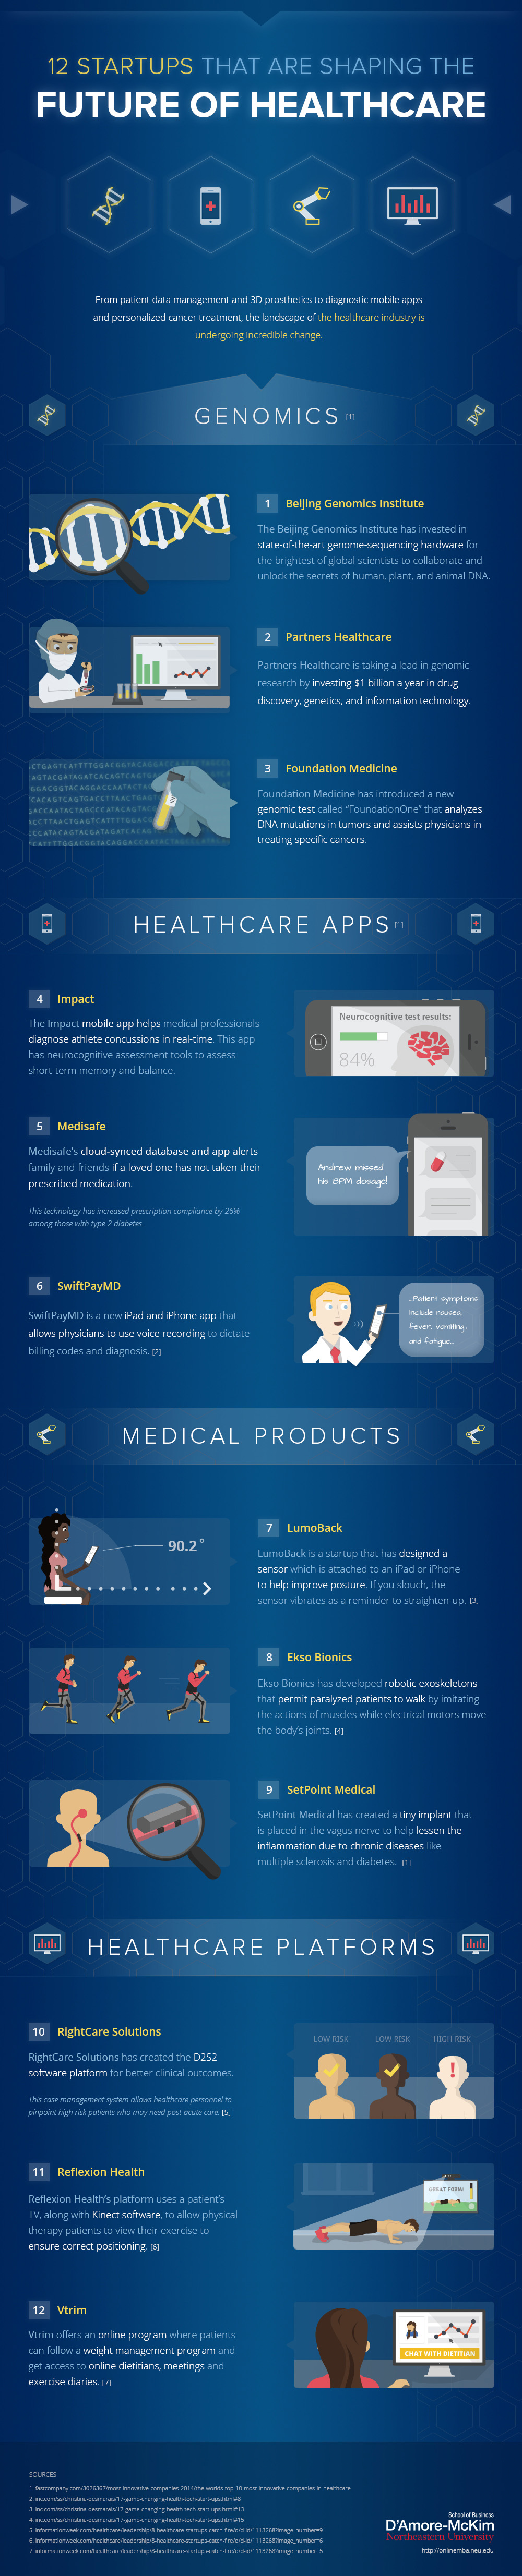 12 Healthcare Startups that are Shaping the Future of Healthcare - Infographic